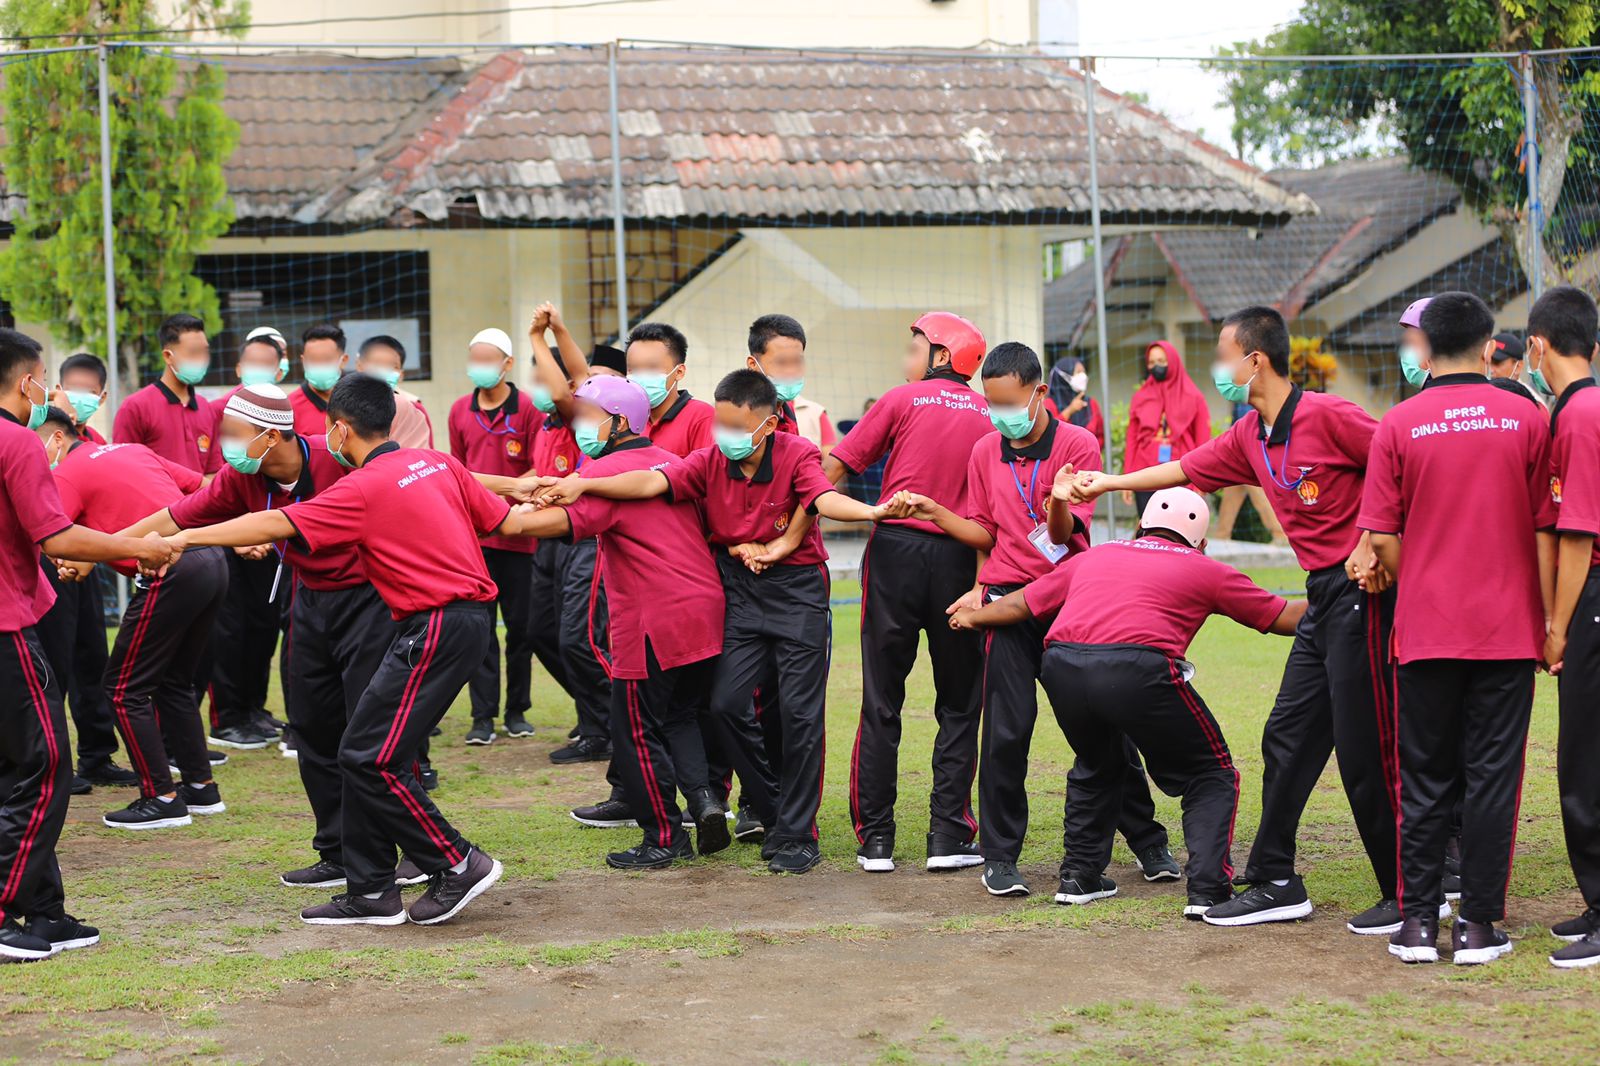 Impact of 'Klitih', Ministry of Social Affairs Motivates and Educates 32 Youth in Yogyakarta